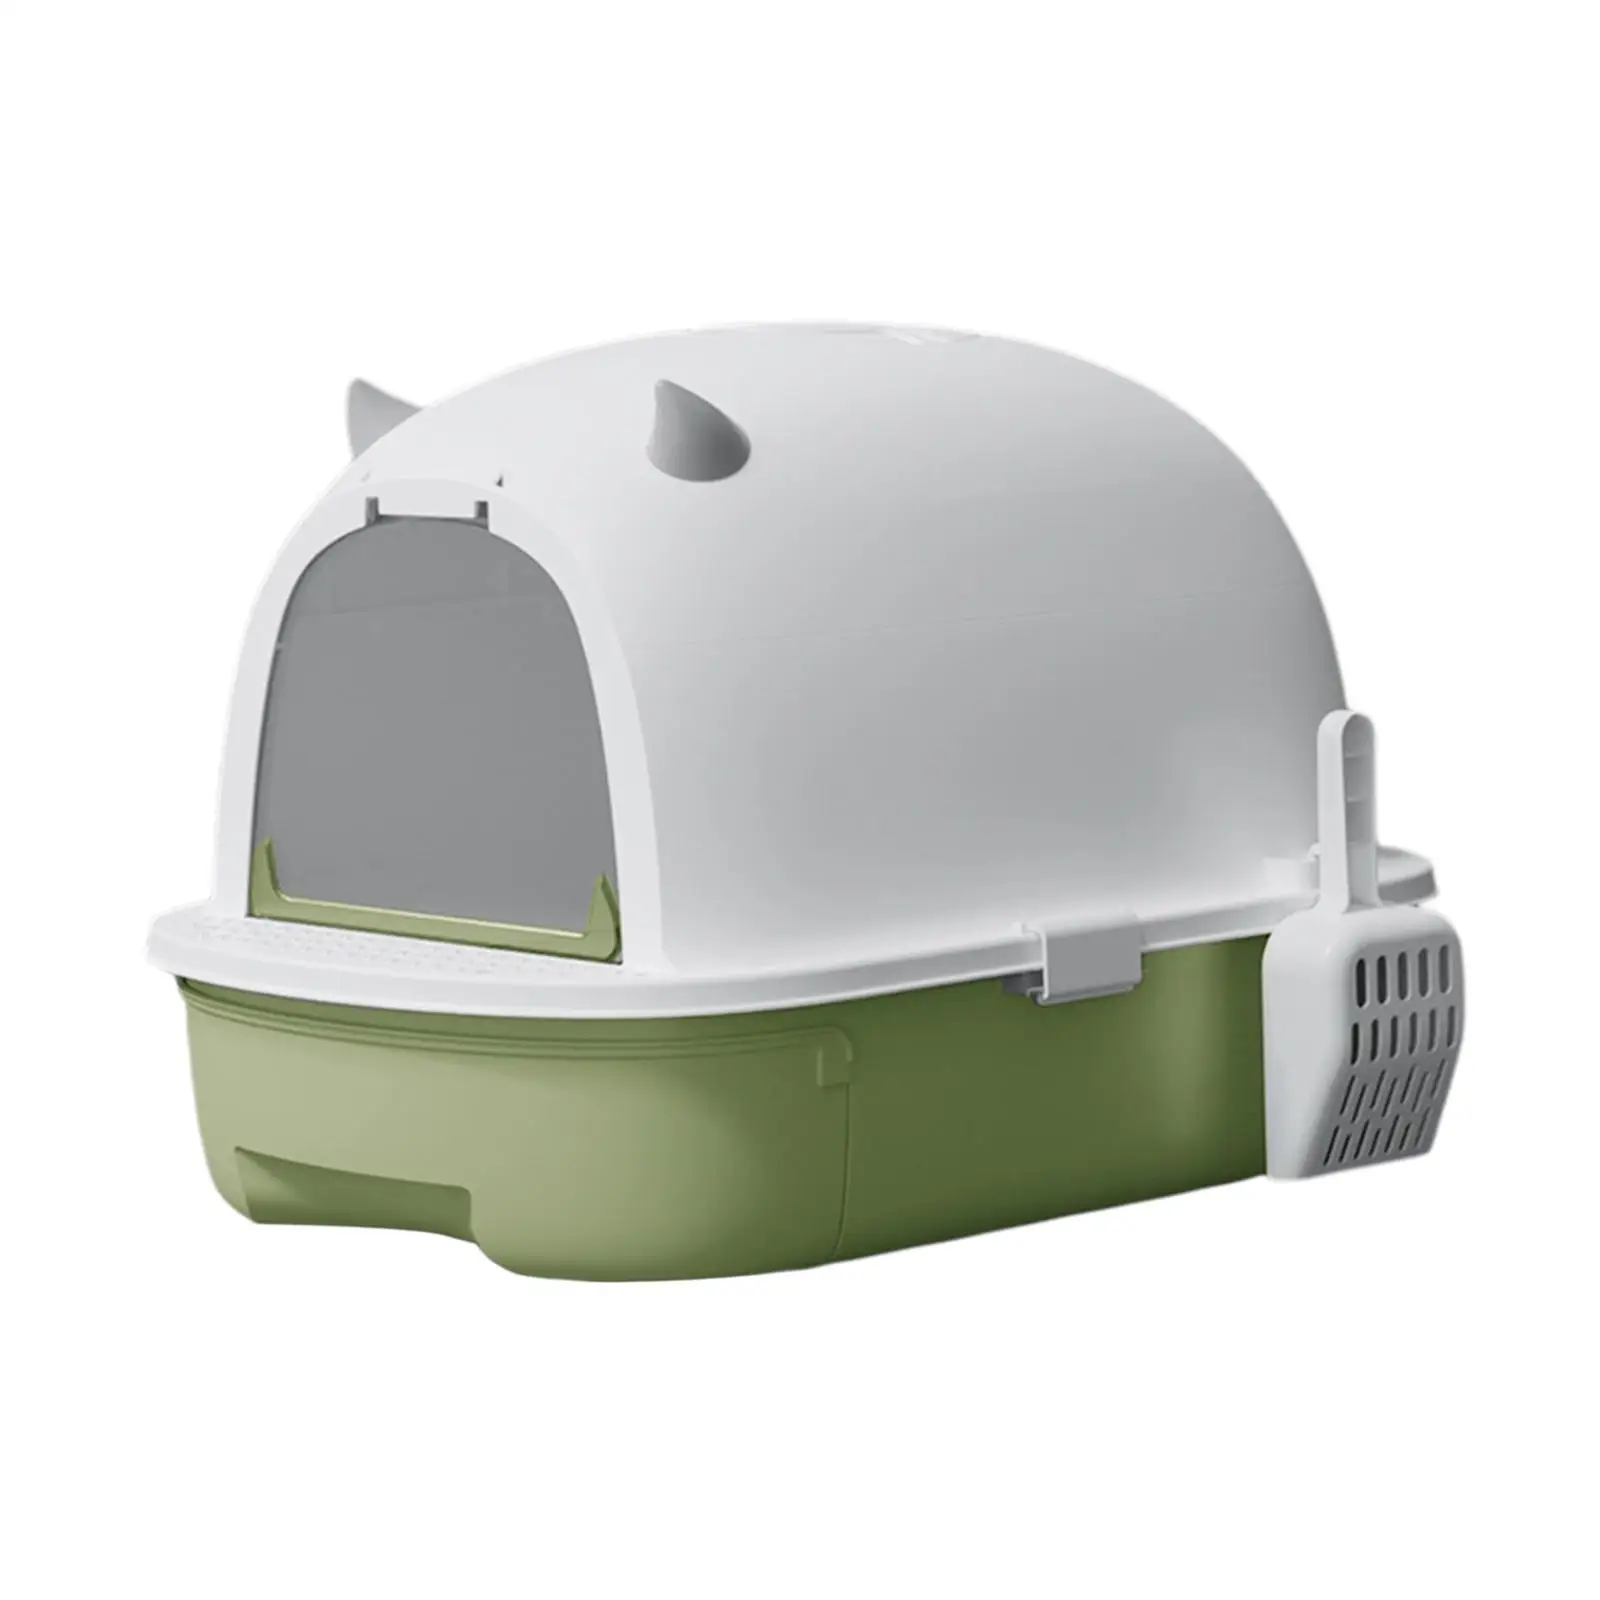 Hooded Cat with Lid Hooded Cat Litter Tray Large Fully Enclosed Cat Toilet Removable Durable Pet with Lid Kitten Potty